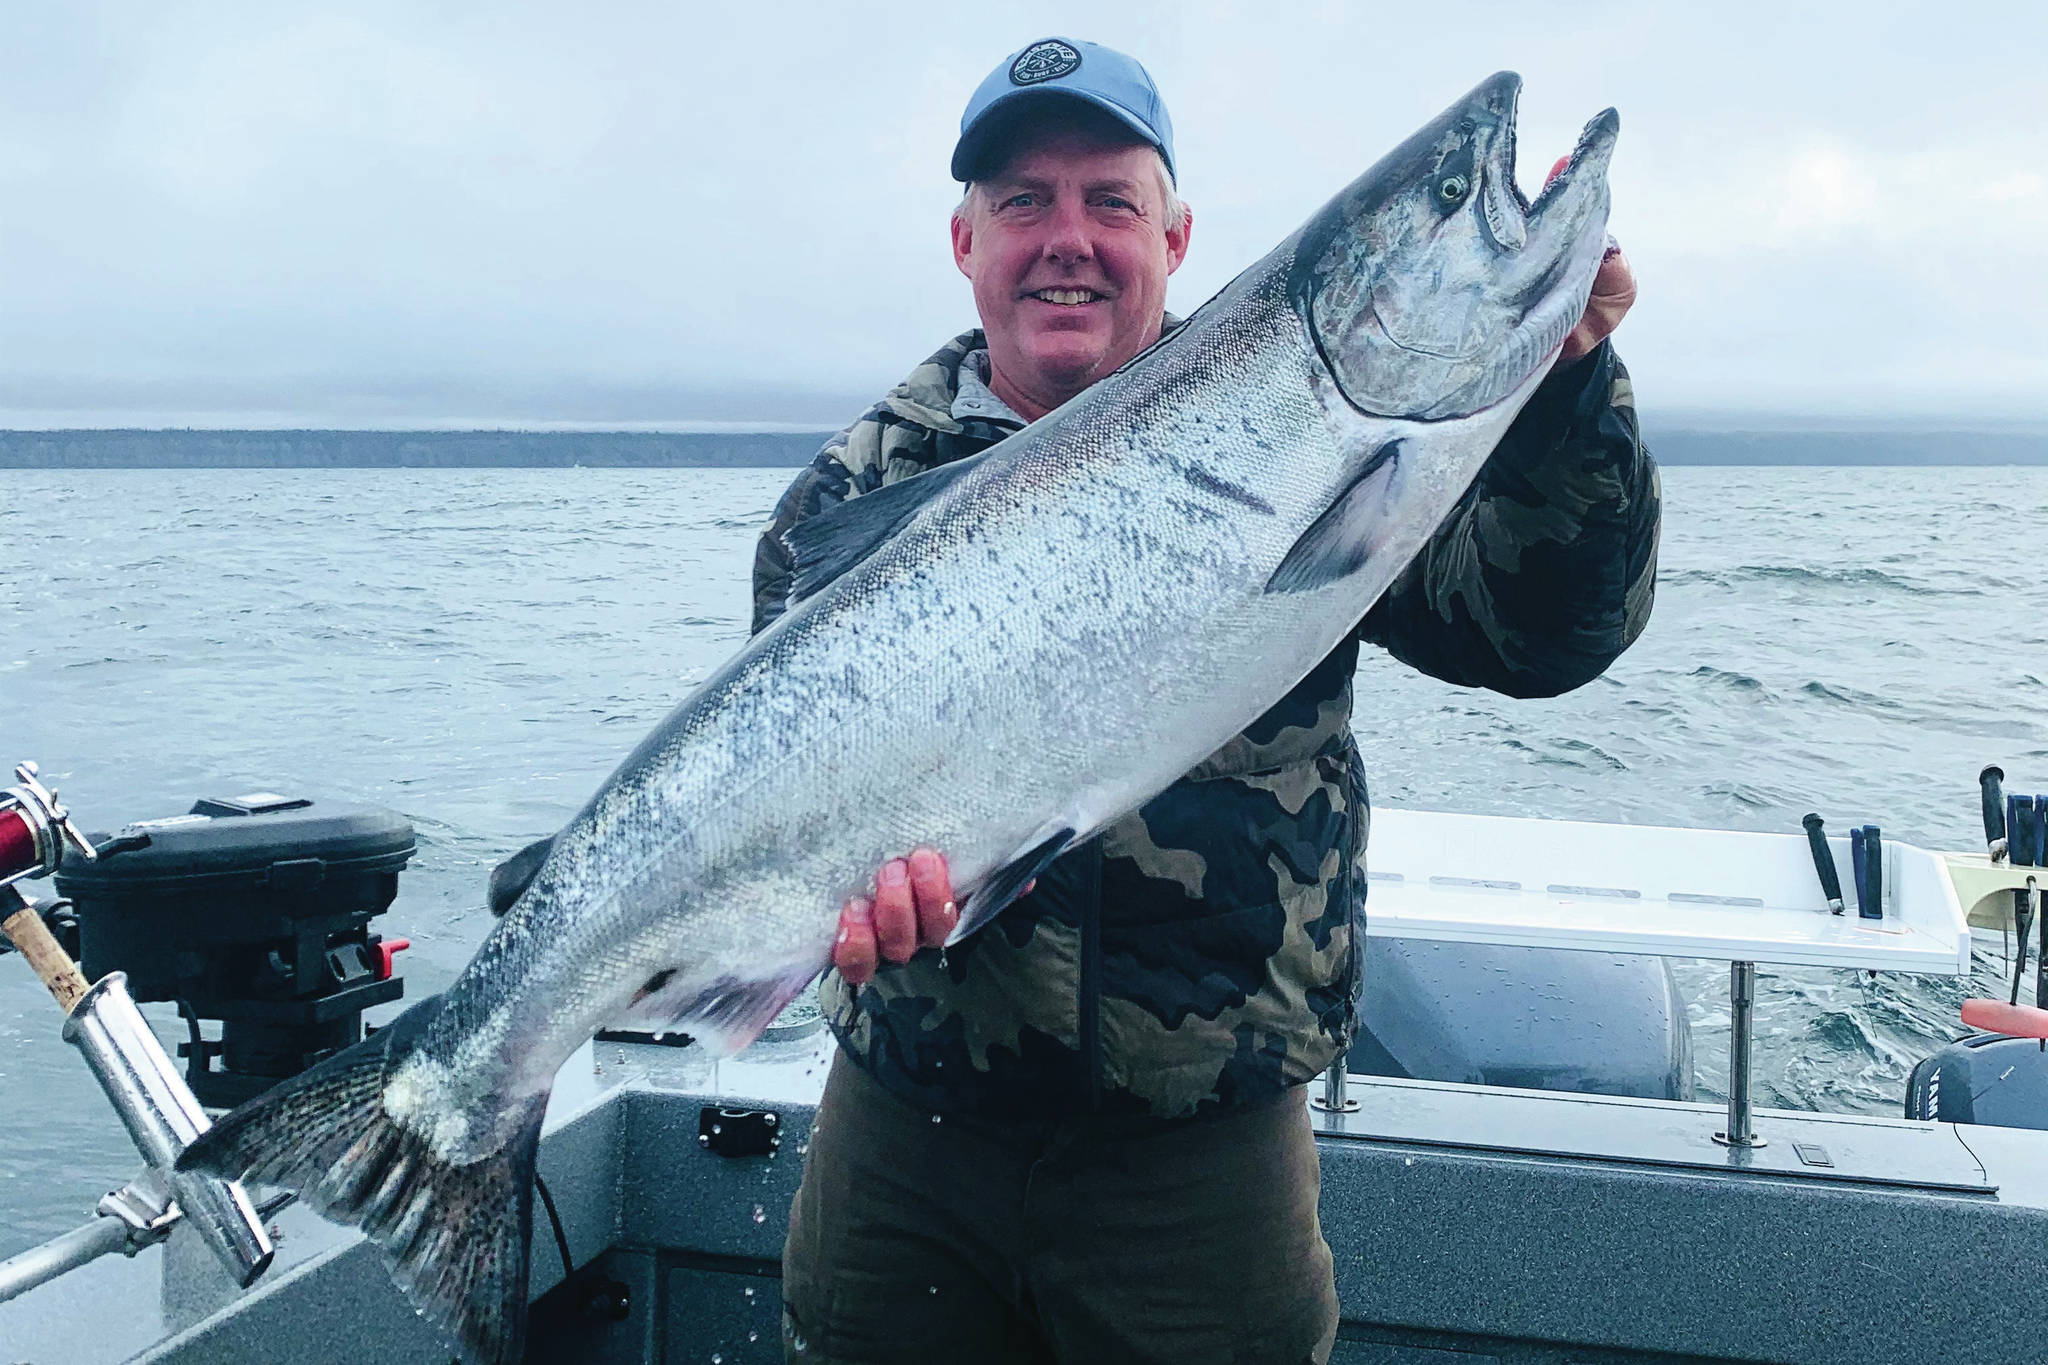 Photo provided by the Anchor Point Chamber of Commerce
The 26th annual Anchor Point King Salmon Derby and Calutta first place fish was caught by Todd Jacobson on the Hurt Locker with a 26.65 pound catch. The derby had 76 anglers participate, and more than 30 fish weighed in.